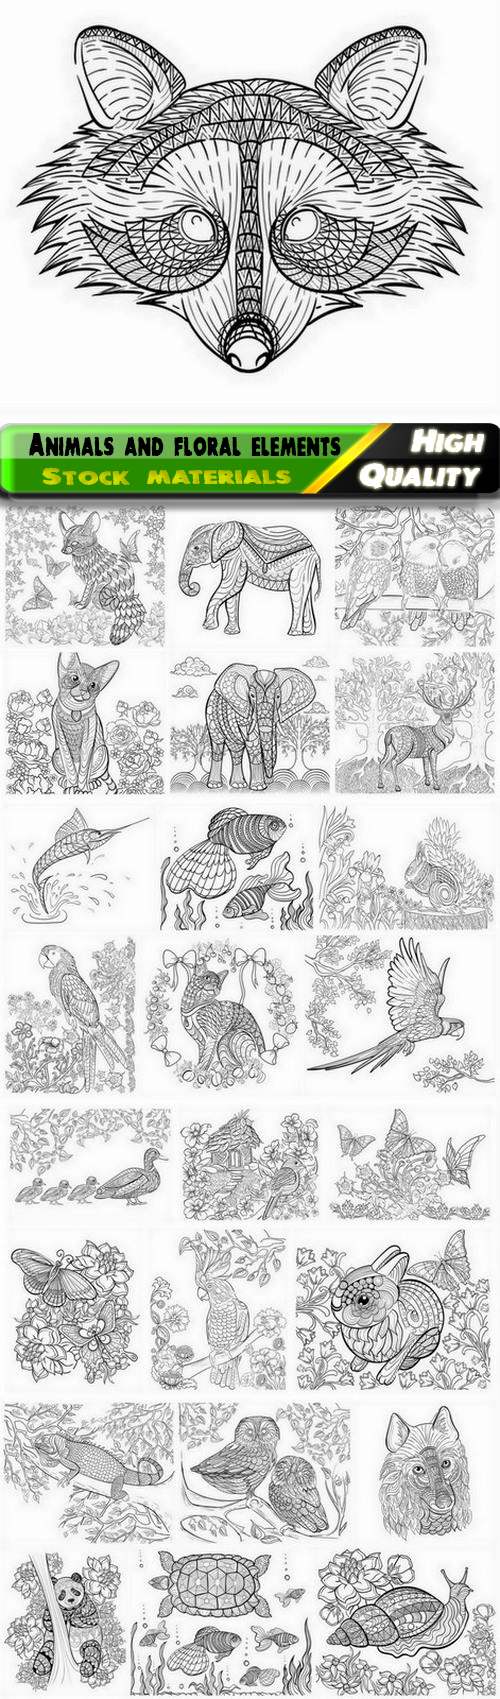 Coloring book with animals and floral elements - 25 Eps